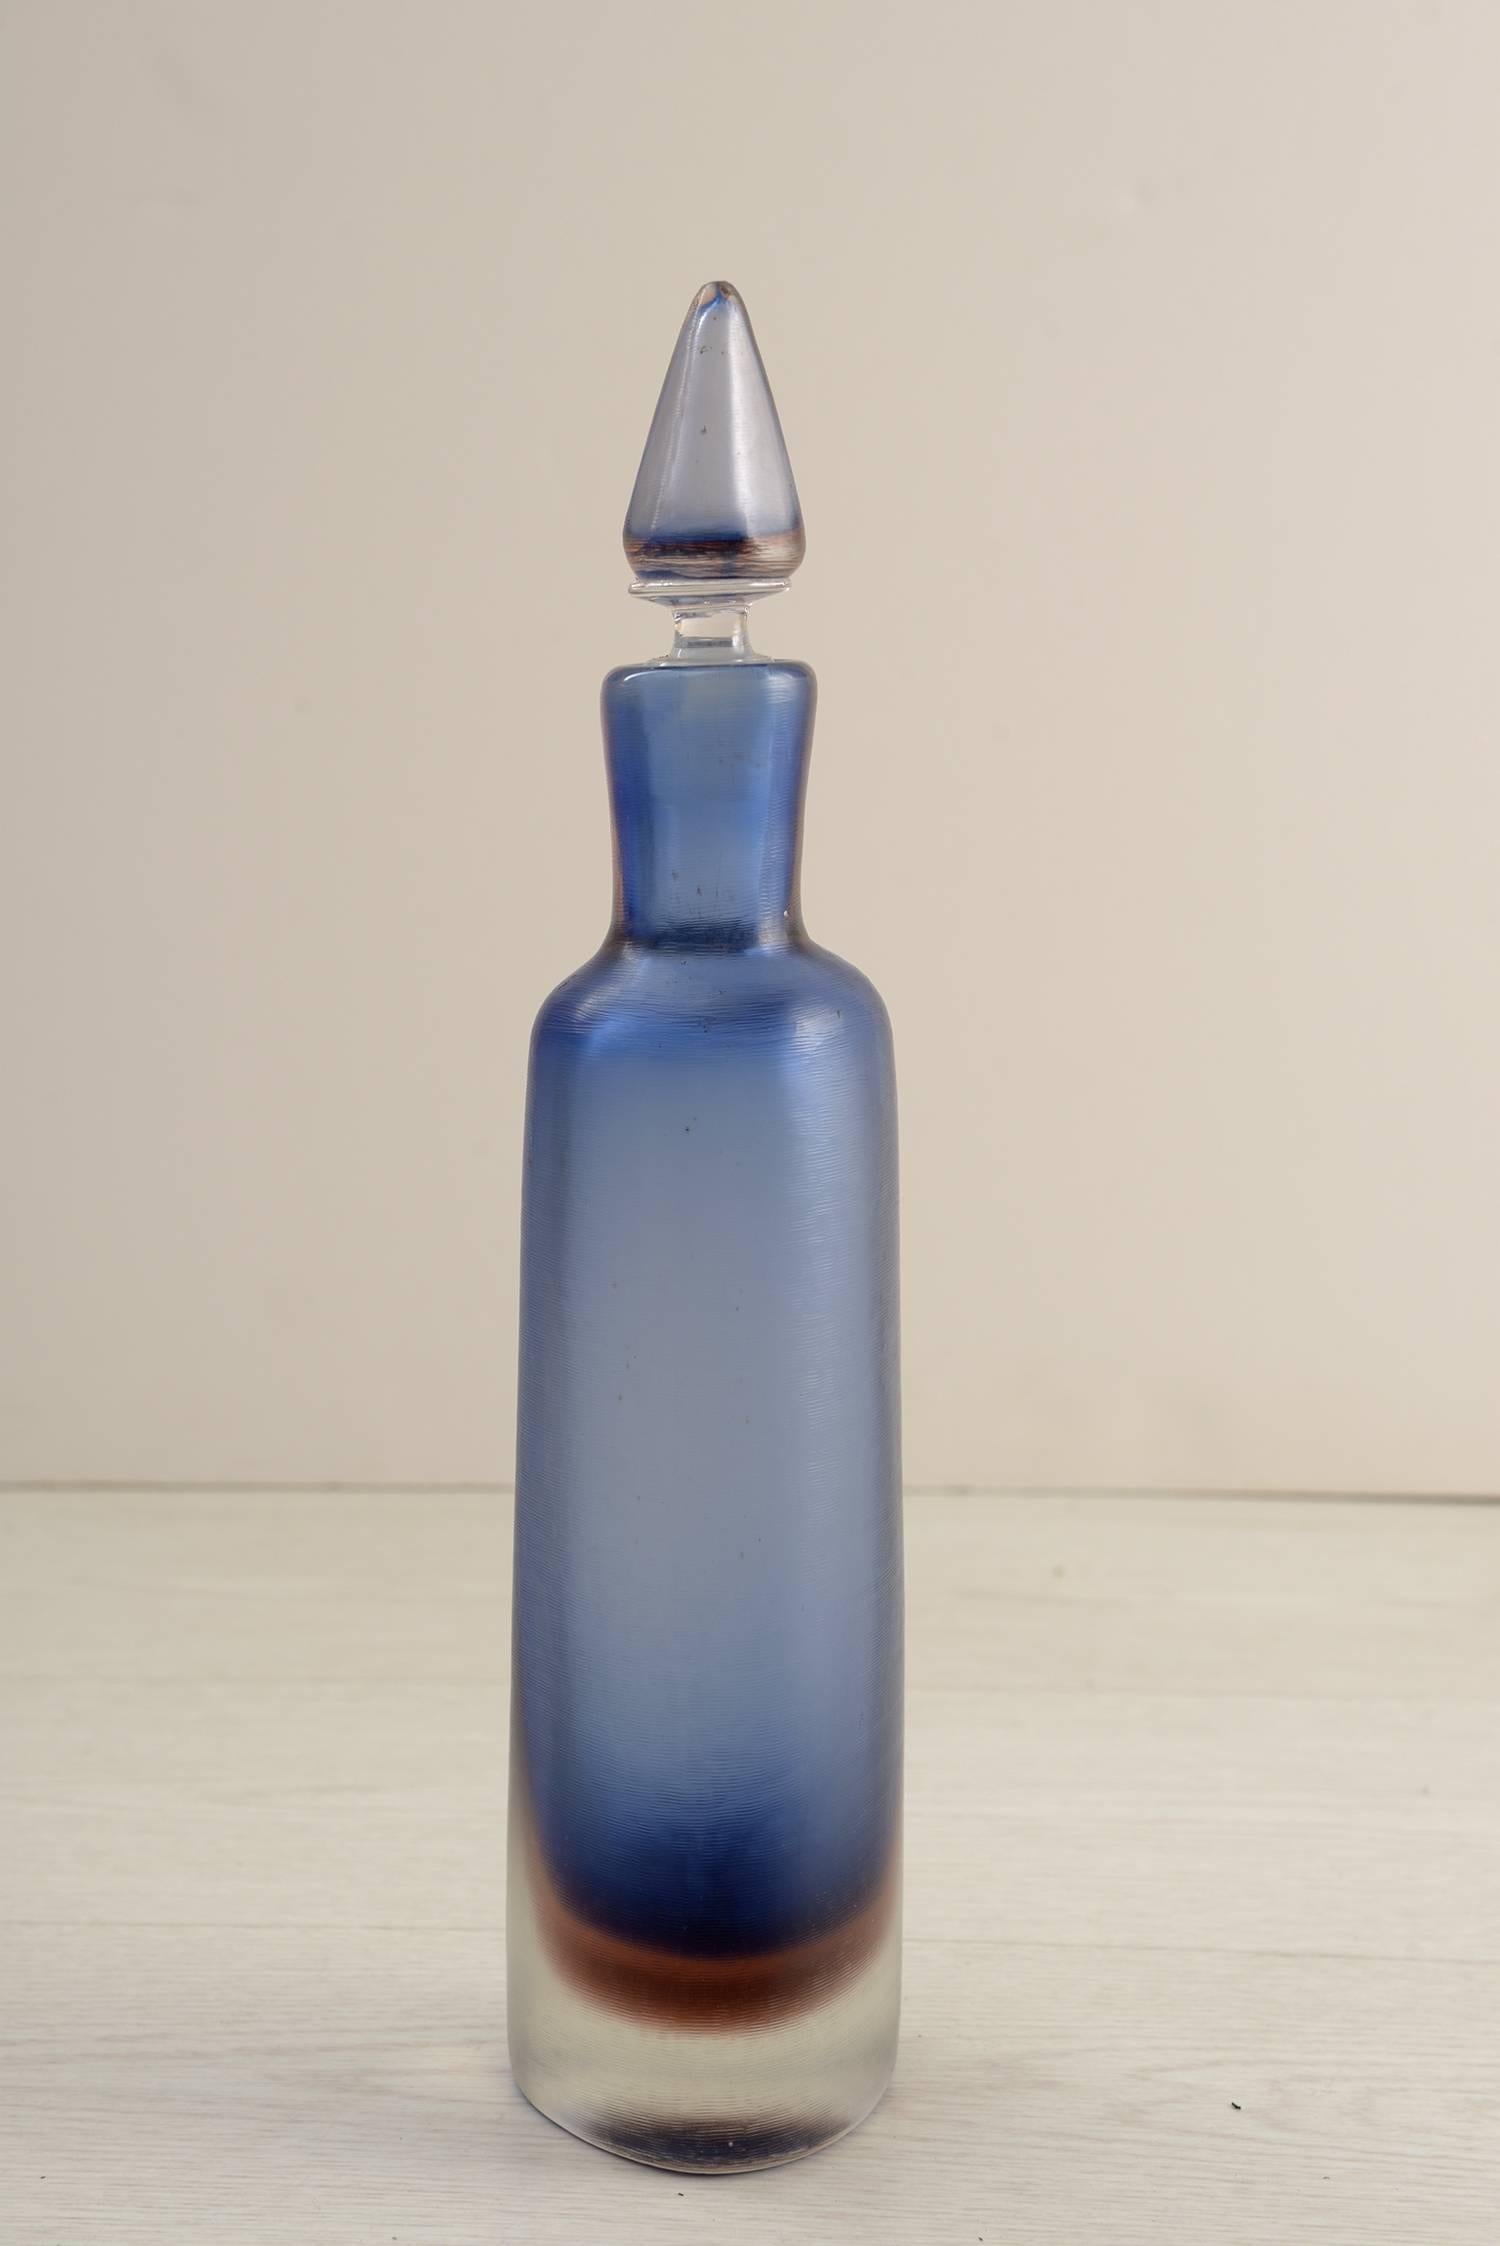 Bleu and brown overline colored bottle with soft engraved by weeks surface.
Triangular section.
Designed by Paolo Venini for Venini Murano in the 1956. Acid signature- Venini Murano Italia. Published.

1957 Exhibition in Hannover.
1960